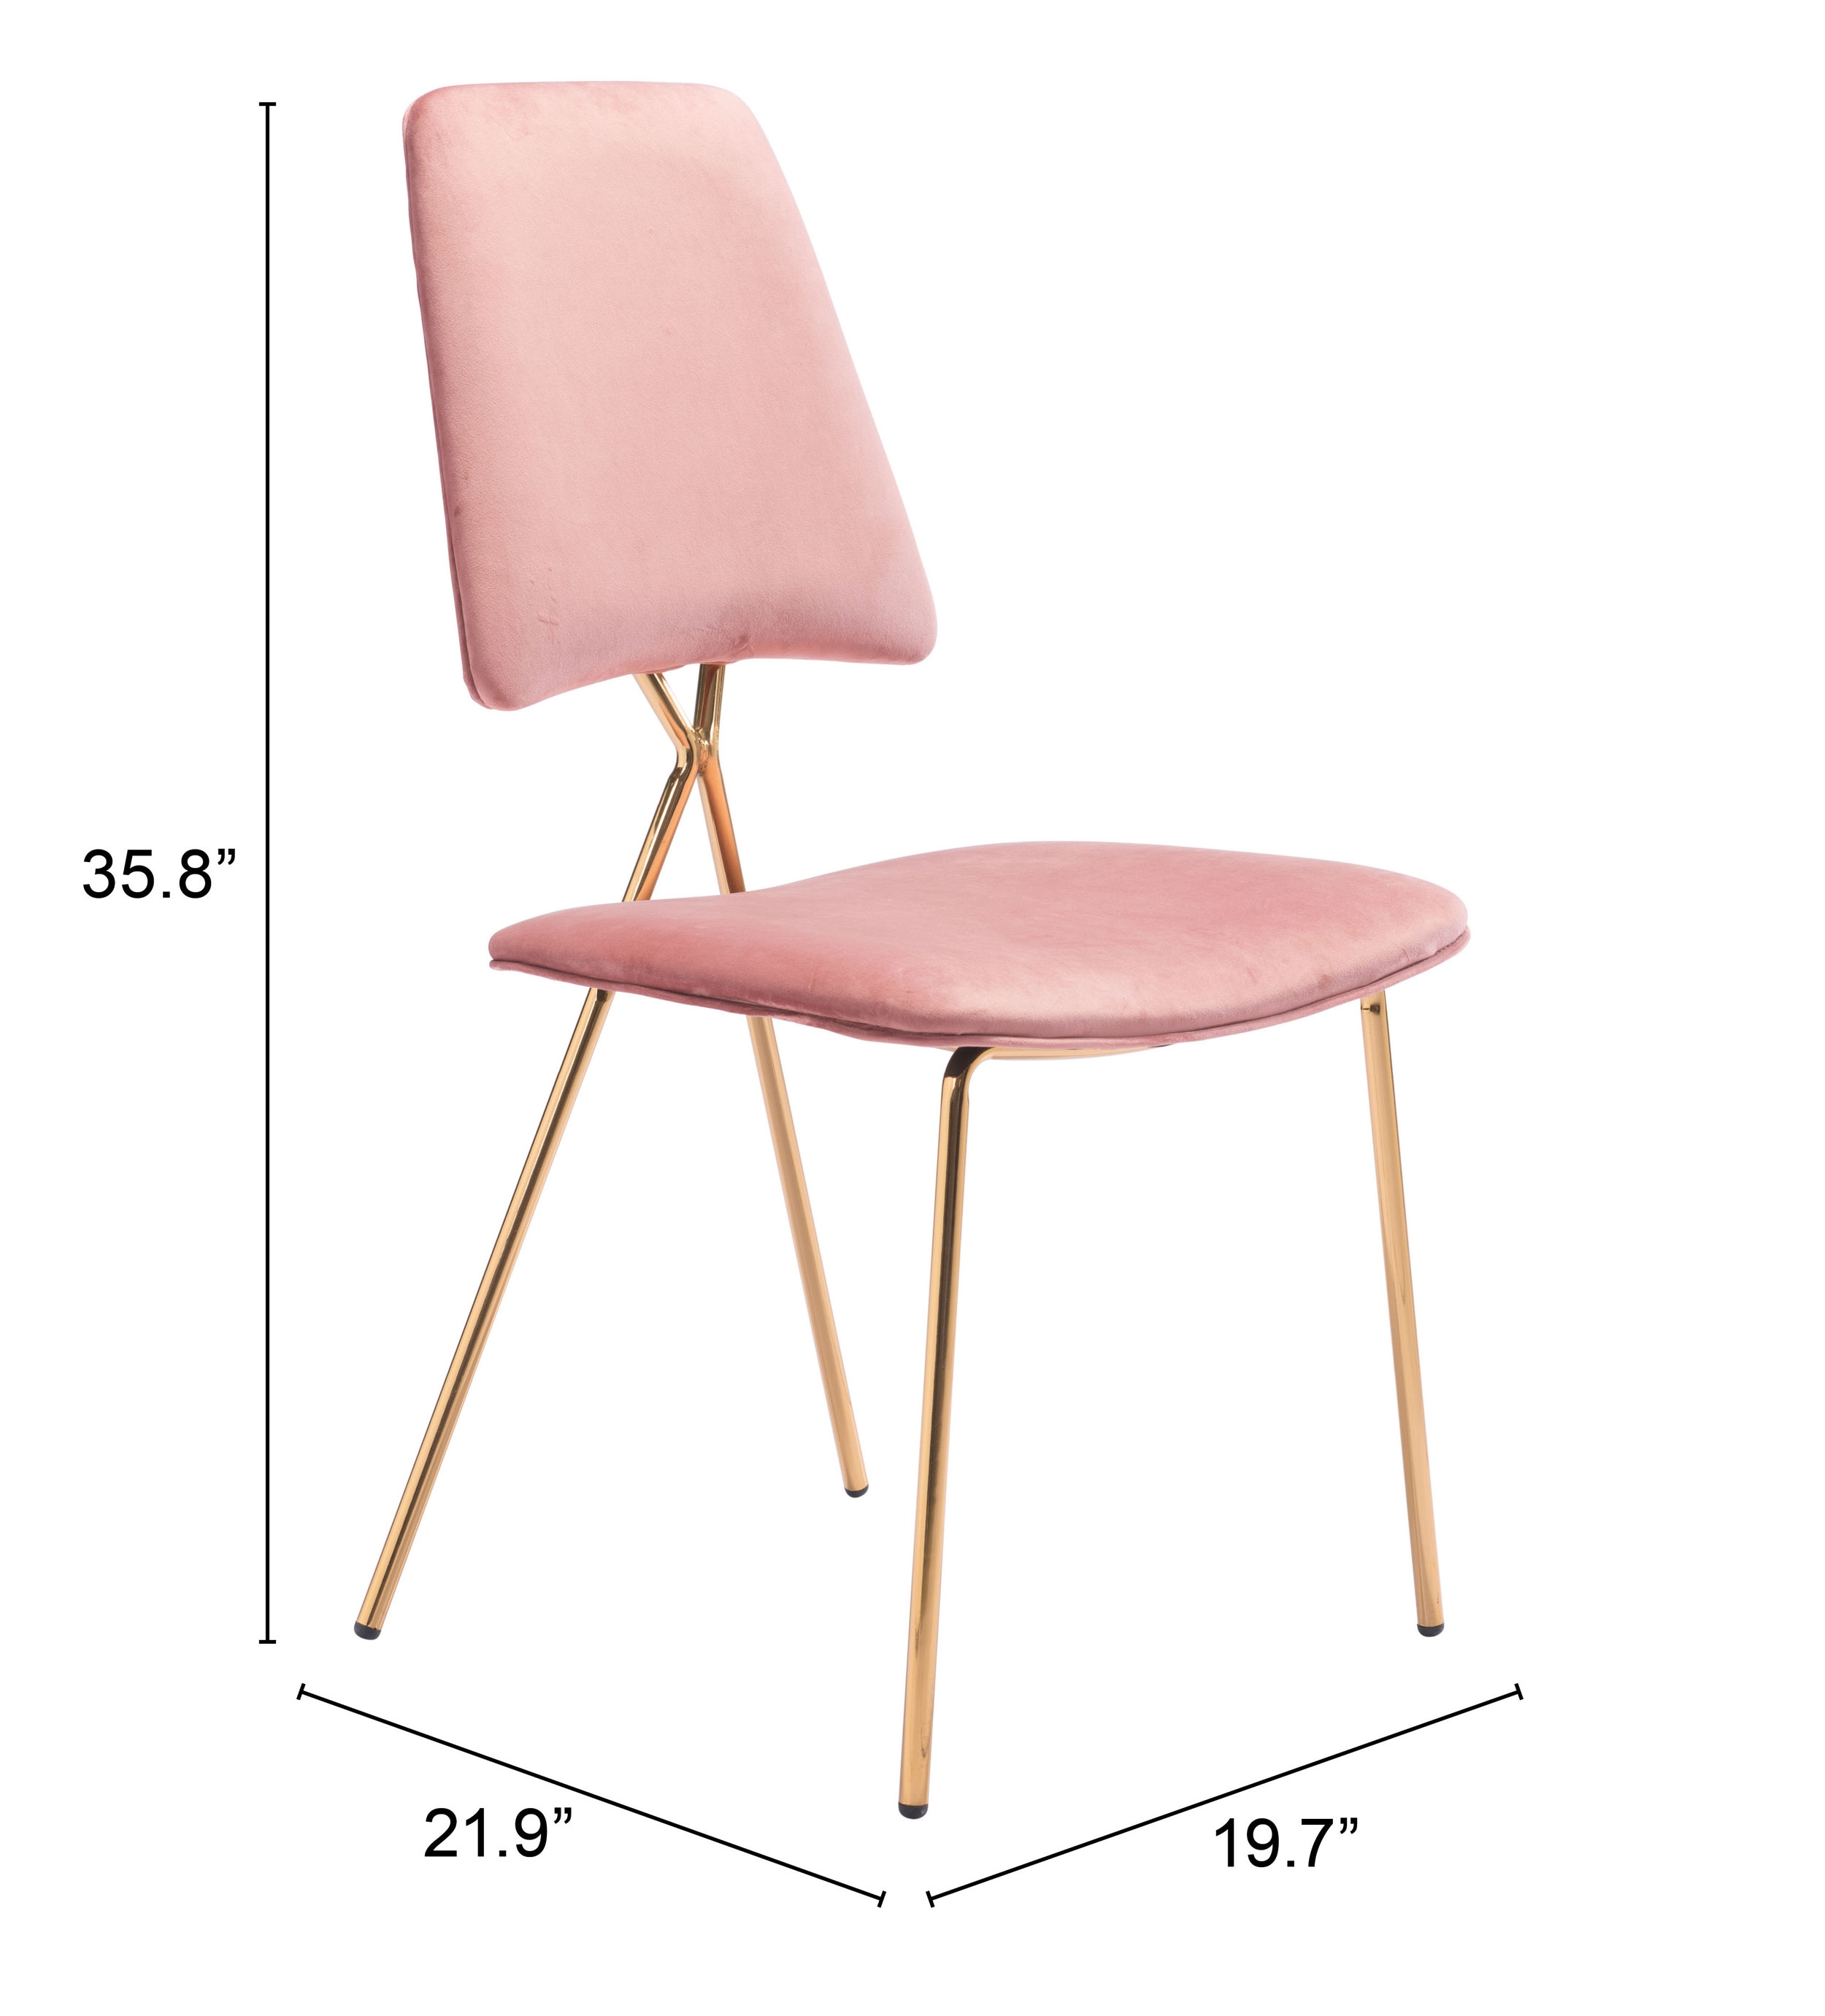 Chloe Dining Chair Pink & Gold (Set of 2) - Image 7